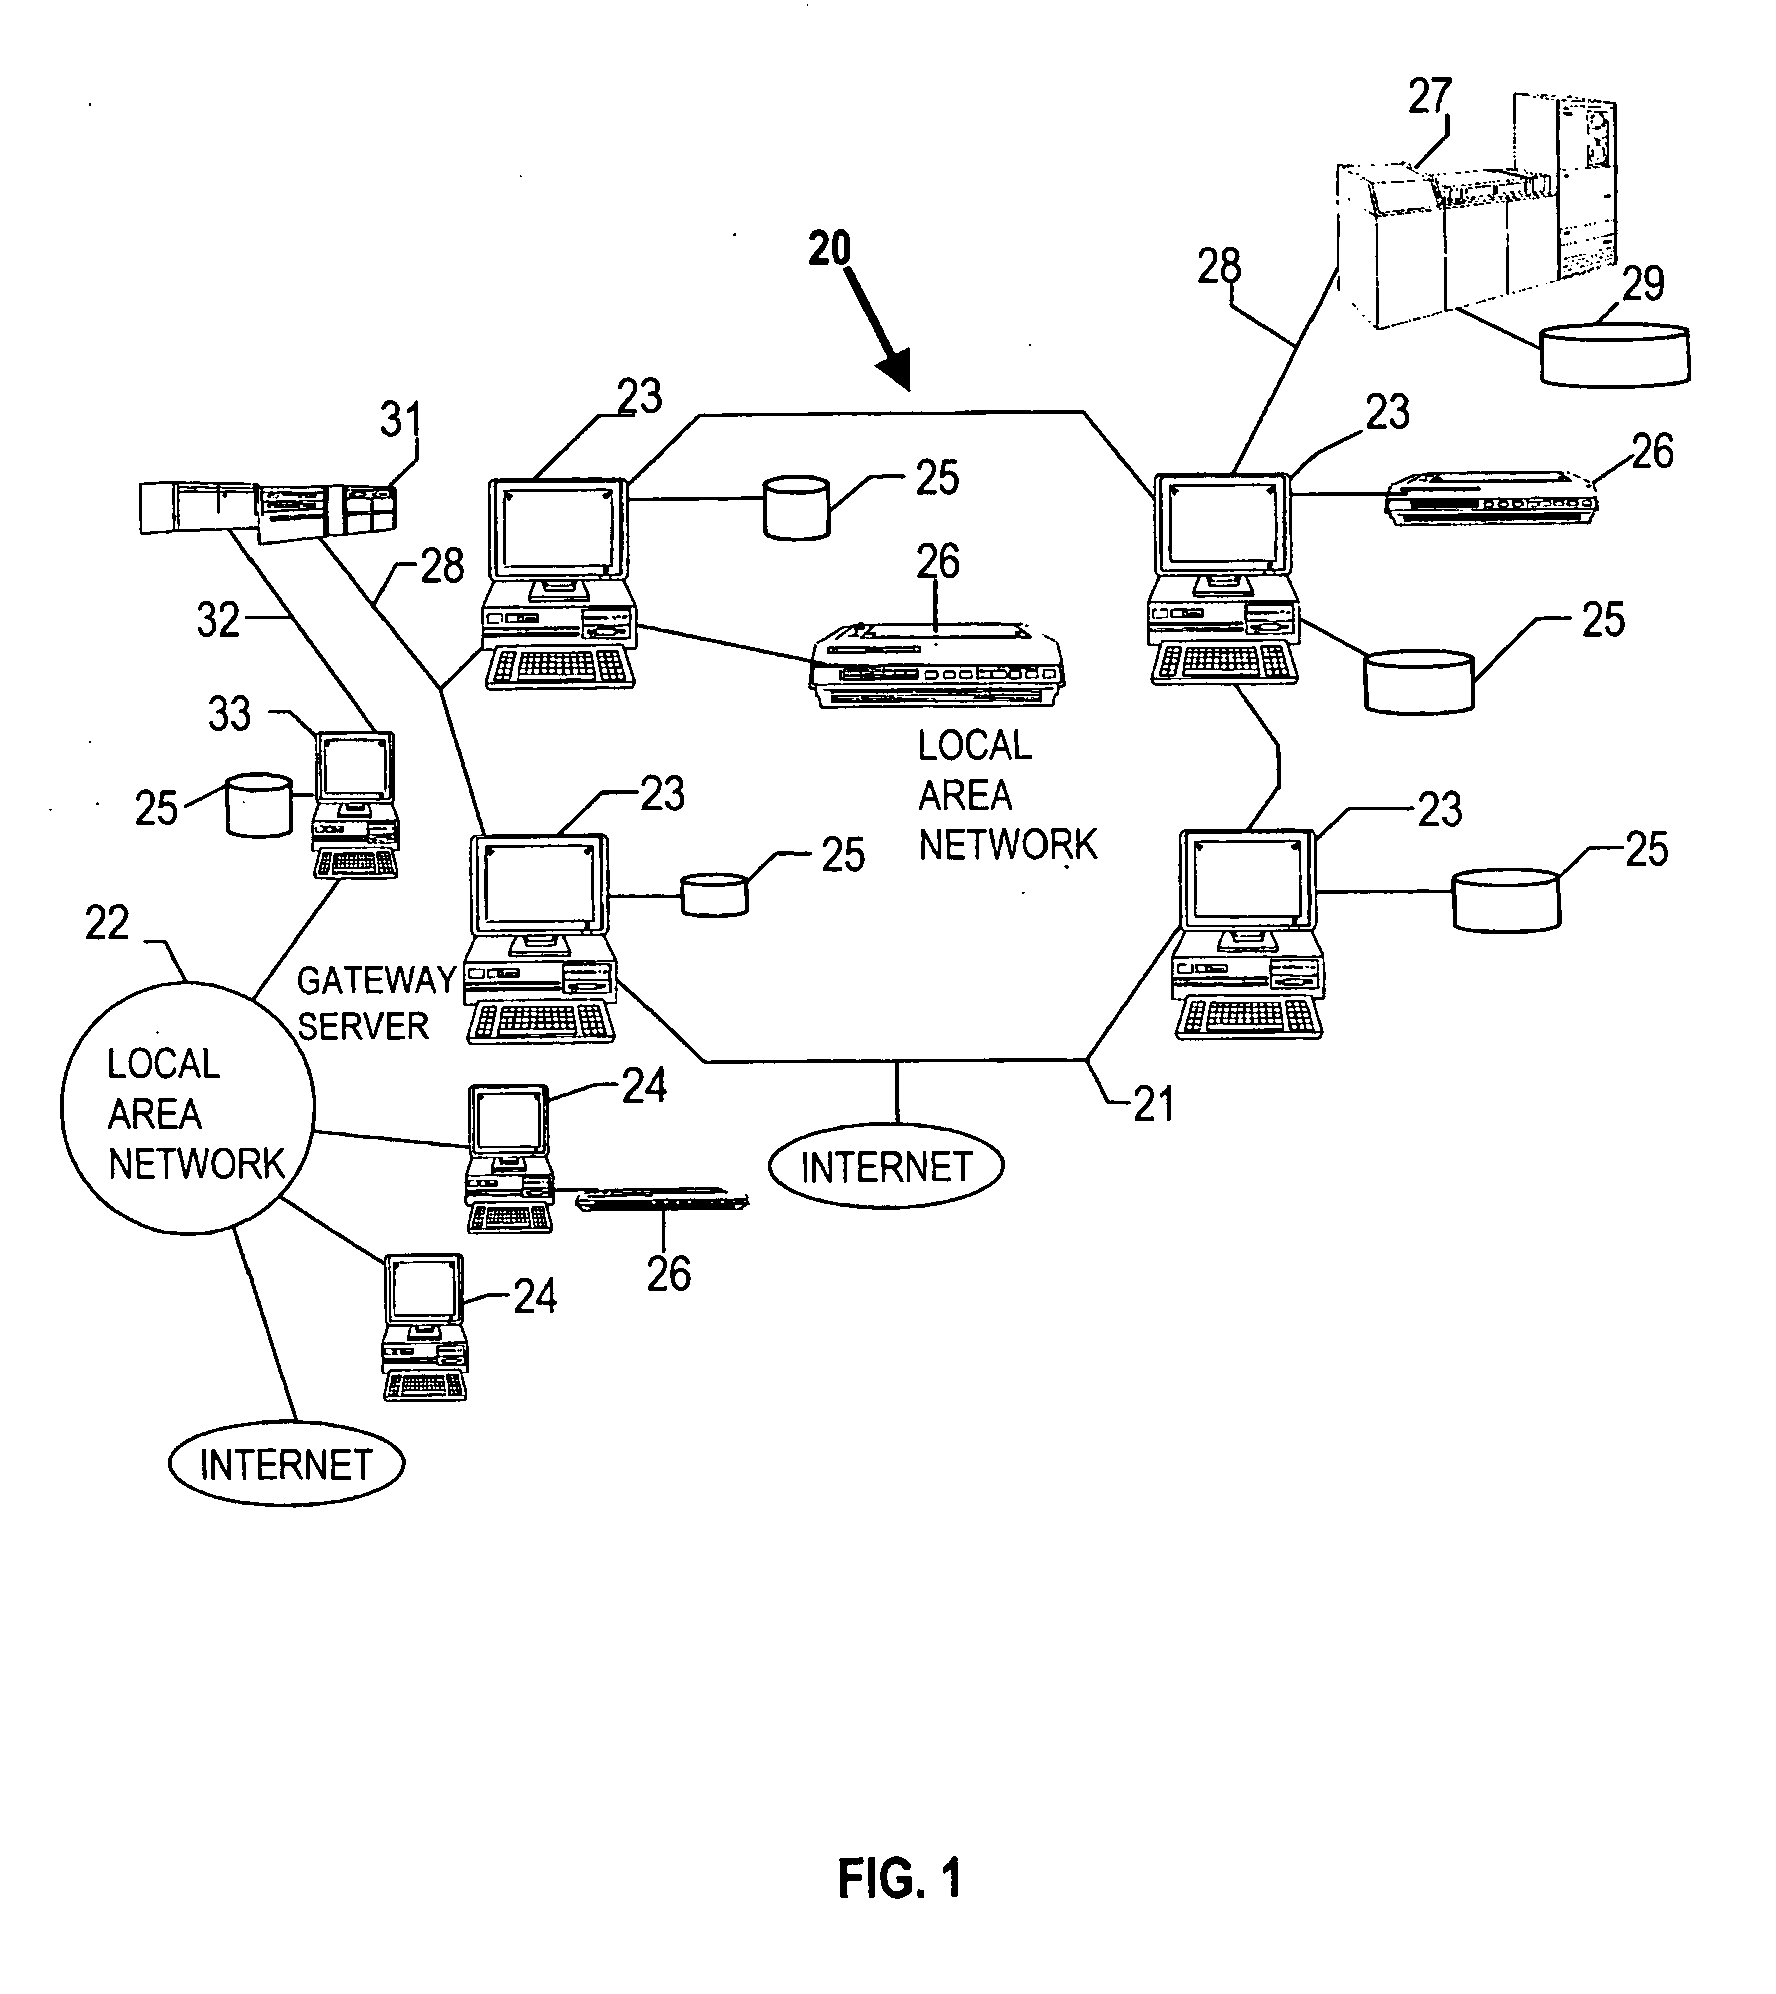 Method for indicating completion status of user initiated and system created tasks